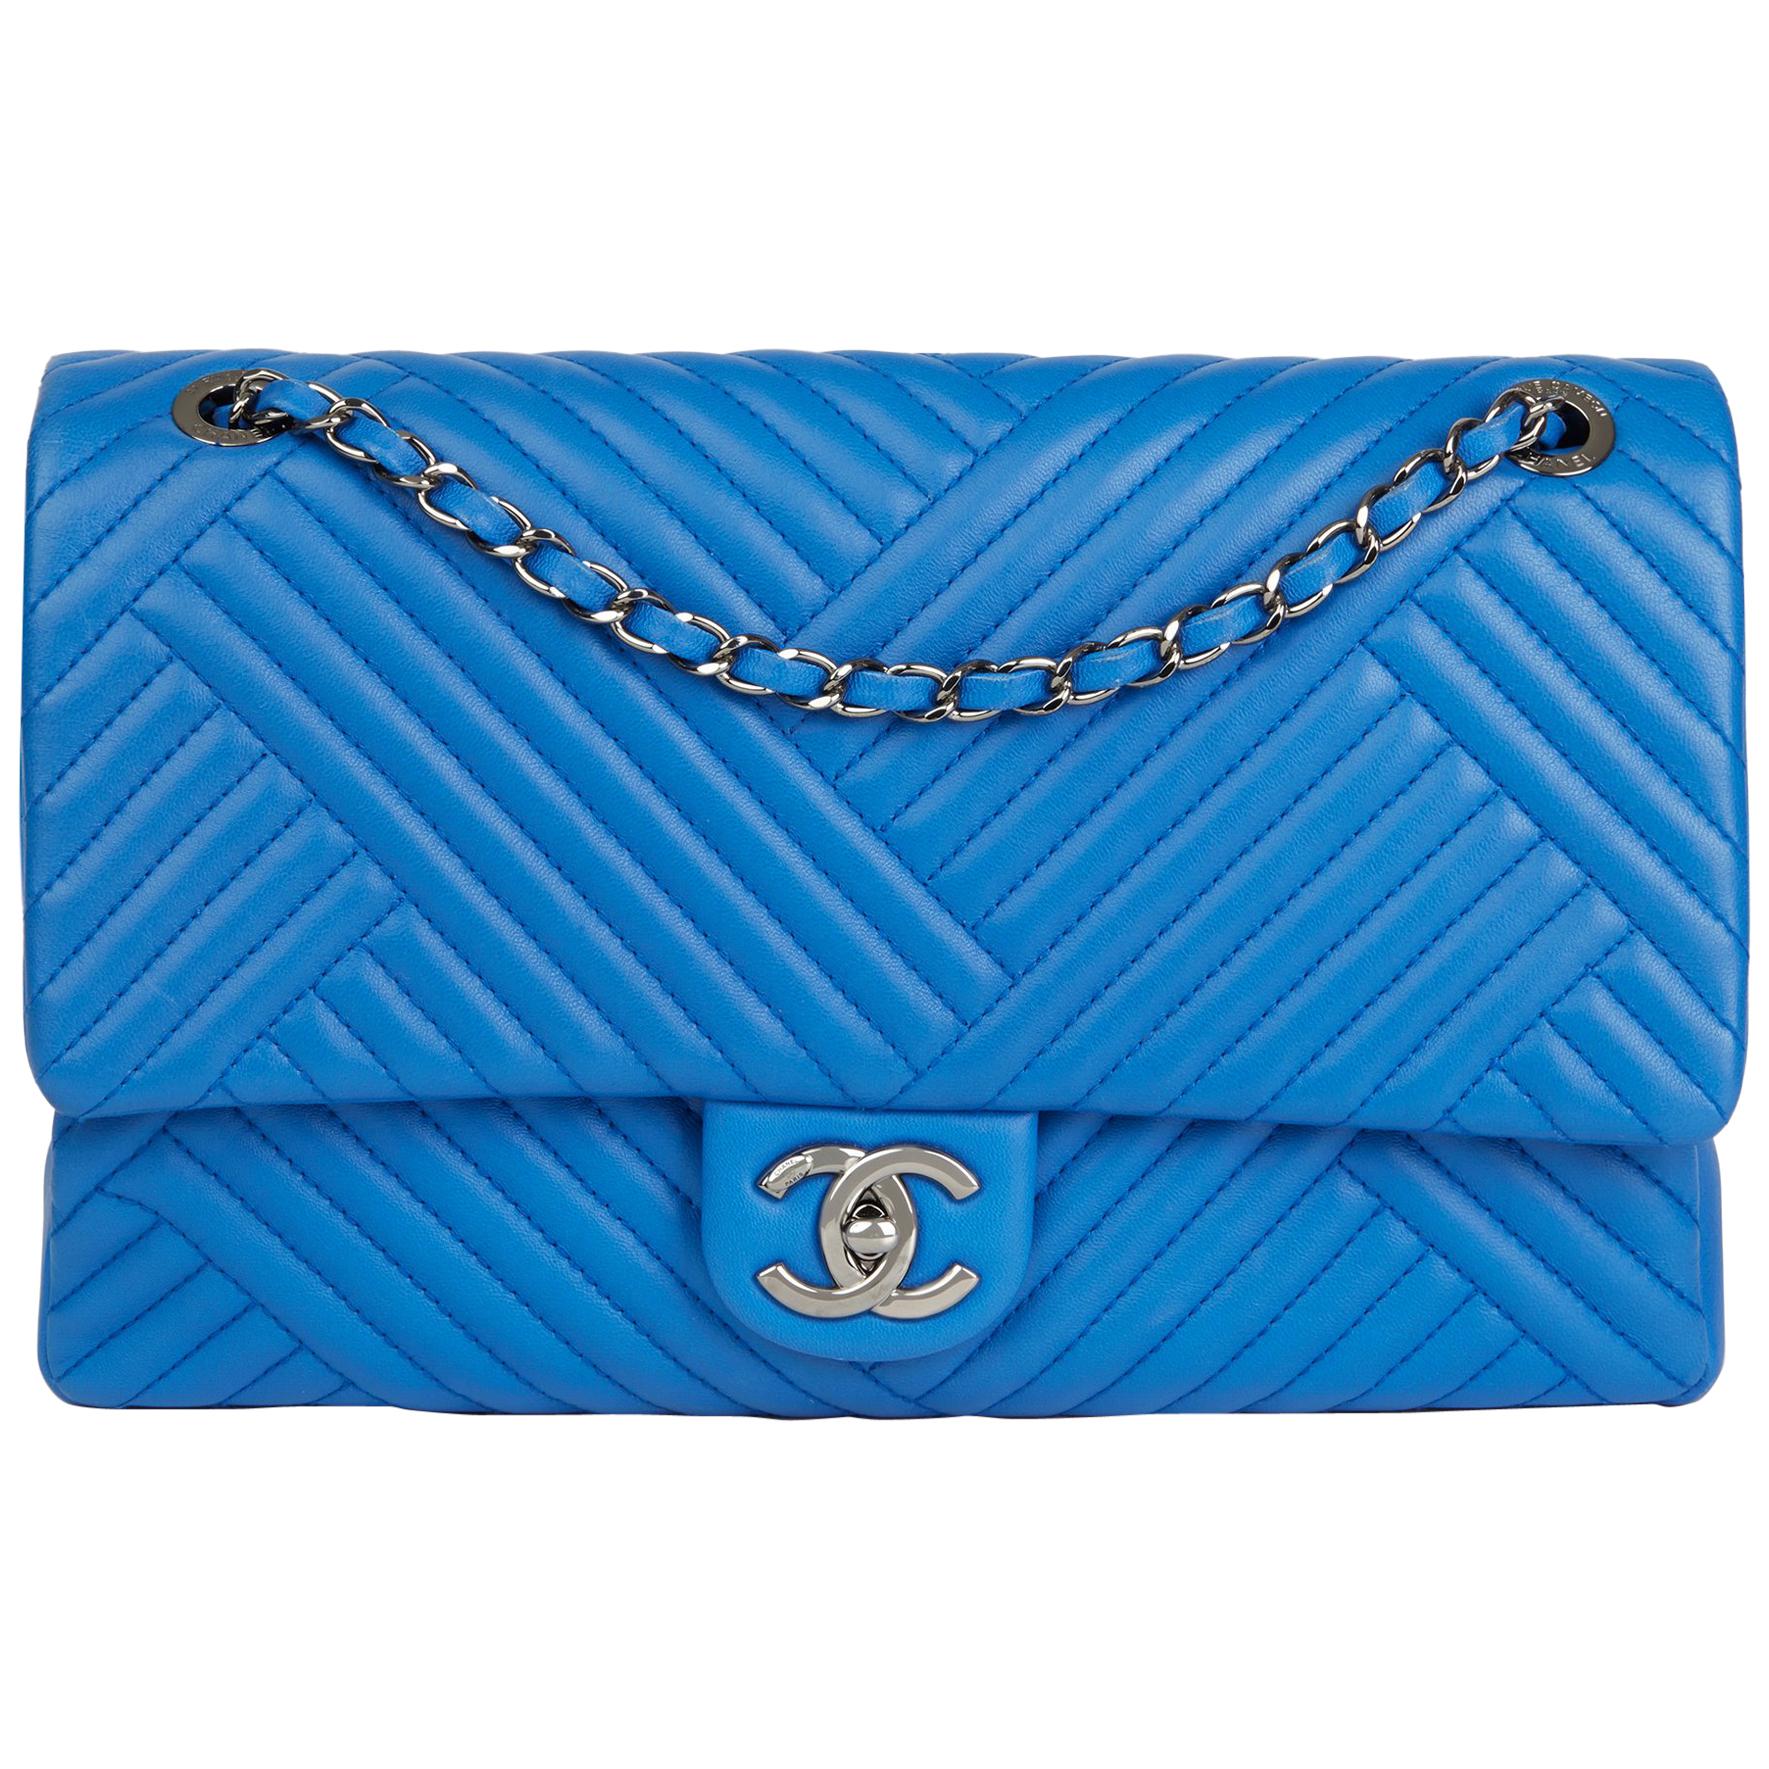 2016 Chanel Blue Chevron Quilted Lambskin Large CC Crossing Flap Bag